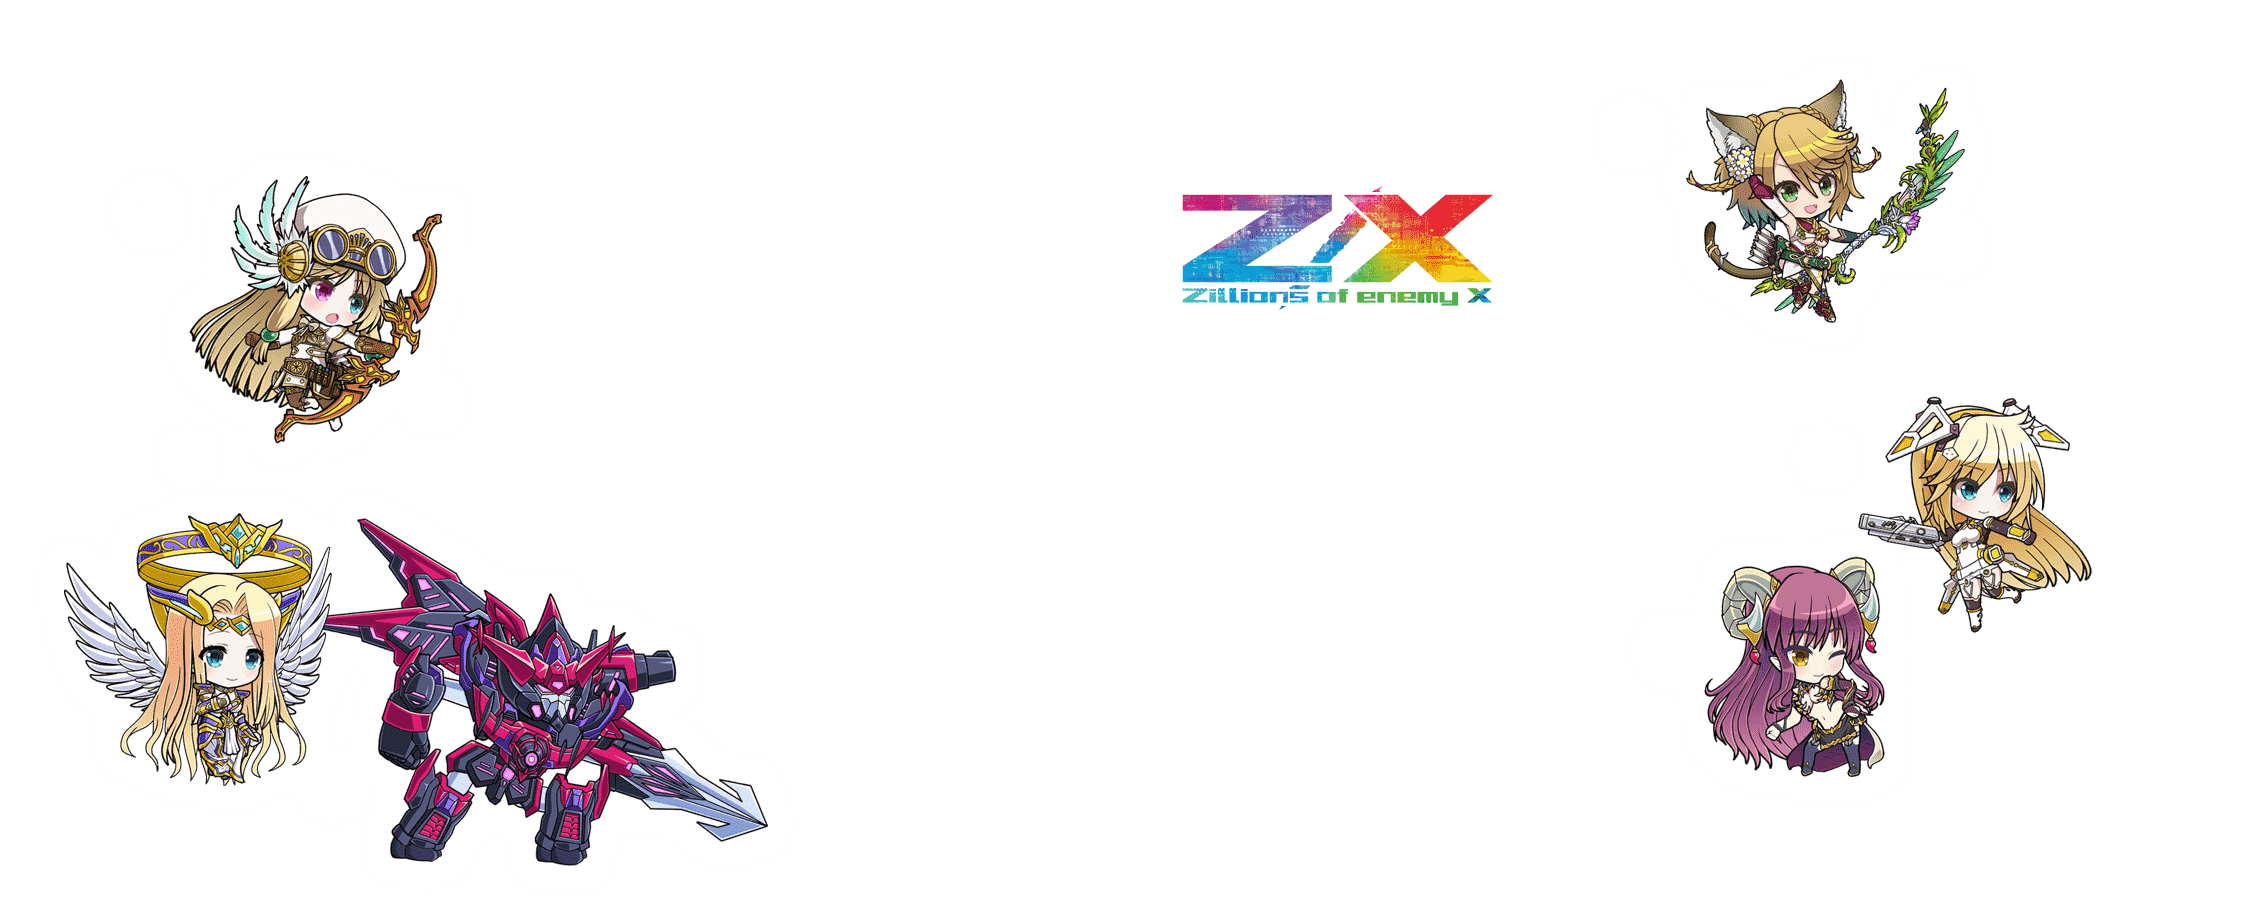 Z X Code Overboost ゼクス コード オーバーブースト 公式サイト Android Ios対応ゲームアプリ